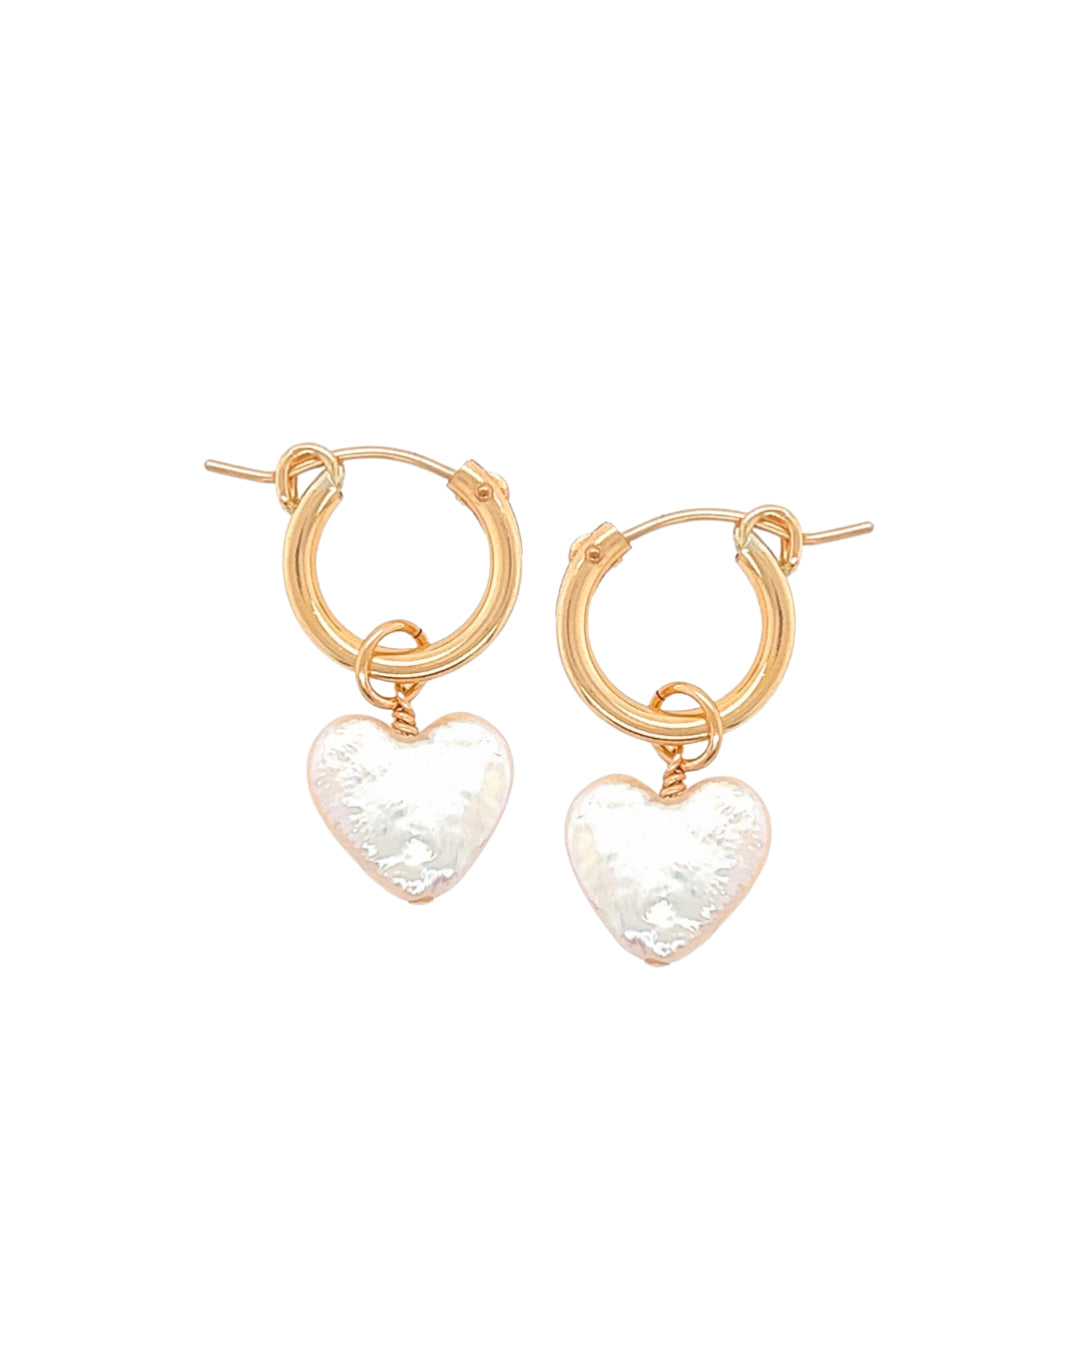 Freshwater Pearl Heart Charms on Gold Filled Hoop Earrings 